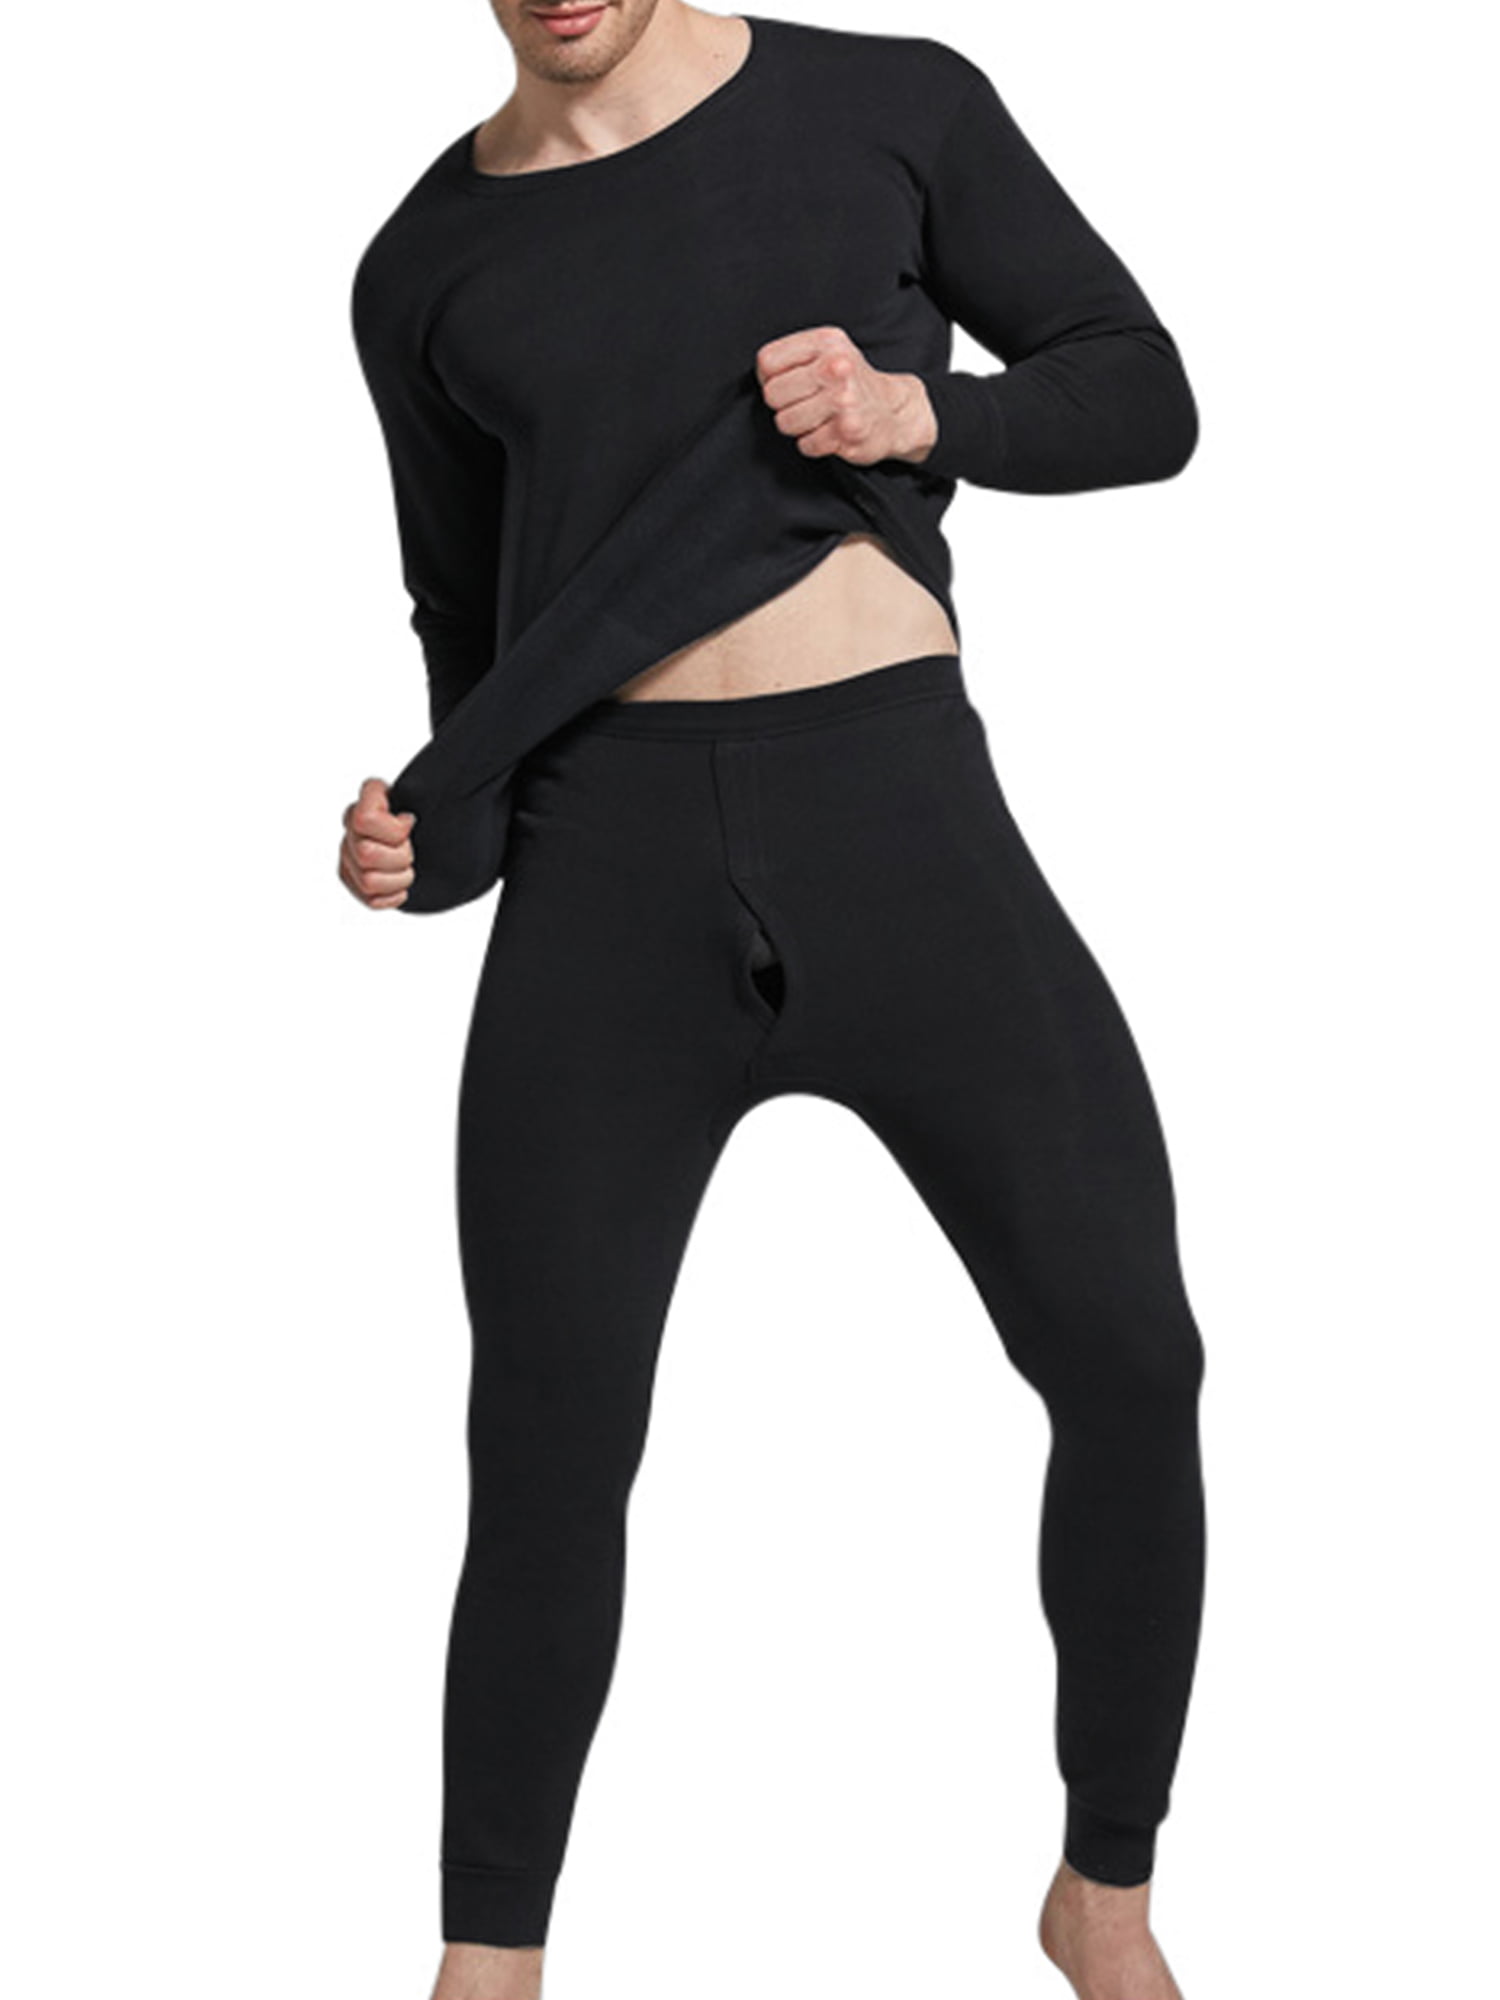 Men Thermal Underwear Set Winter Skiing Warm Top Thermal Long Johns Bottom Pants Base Layer for Male 